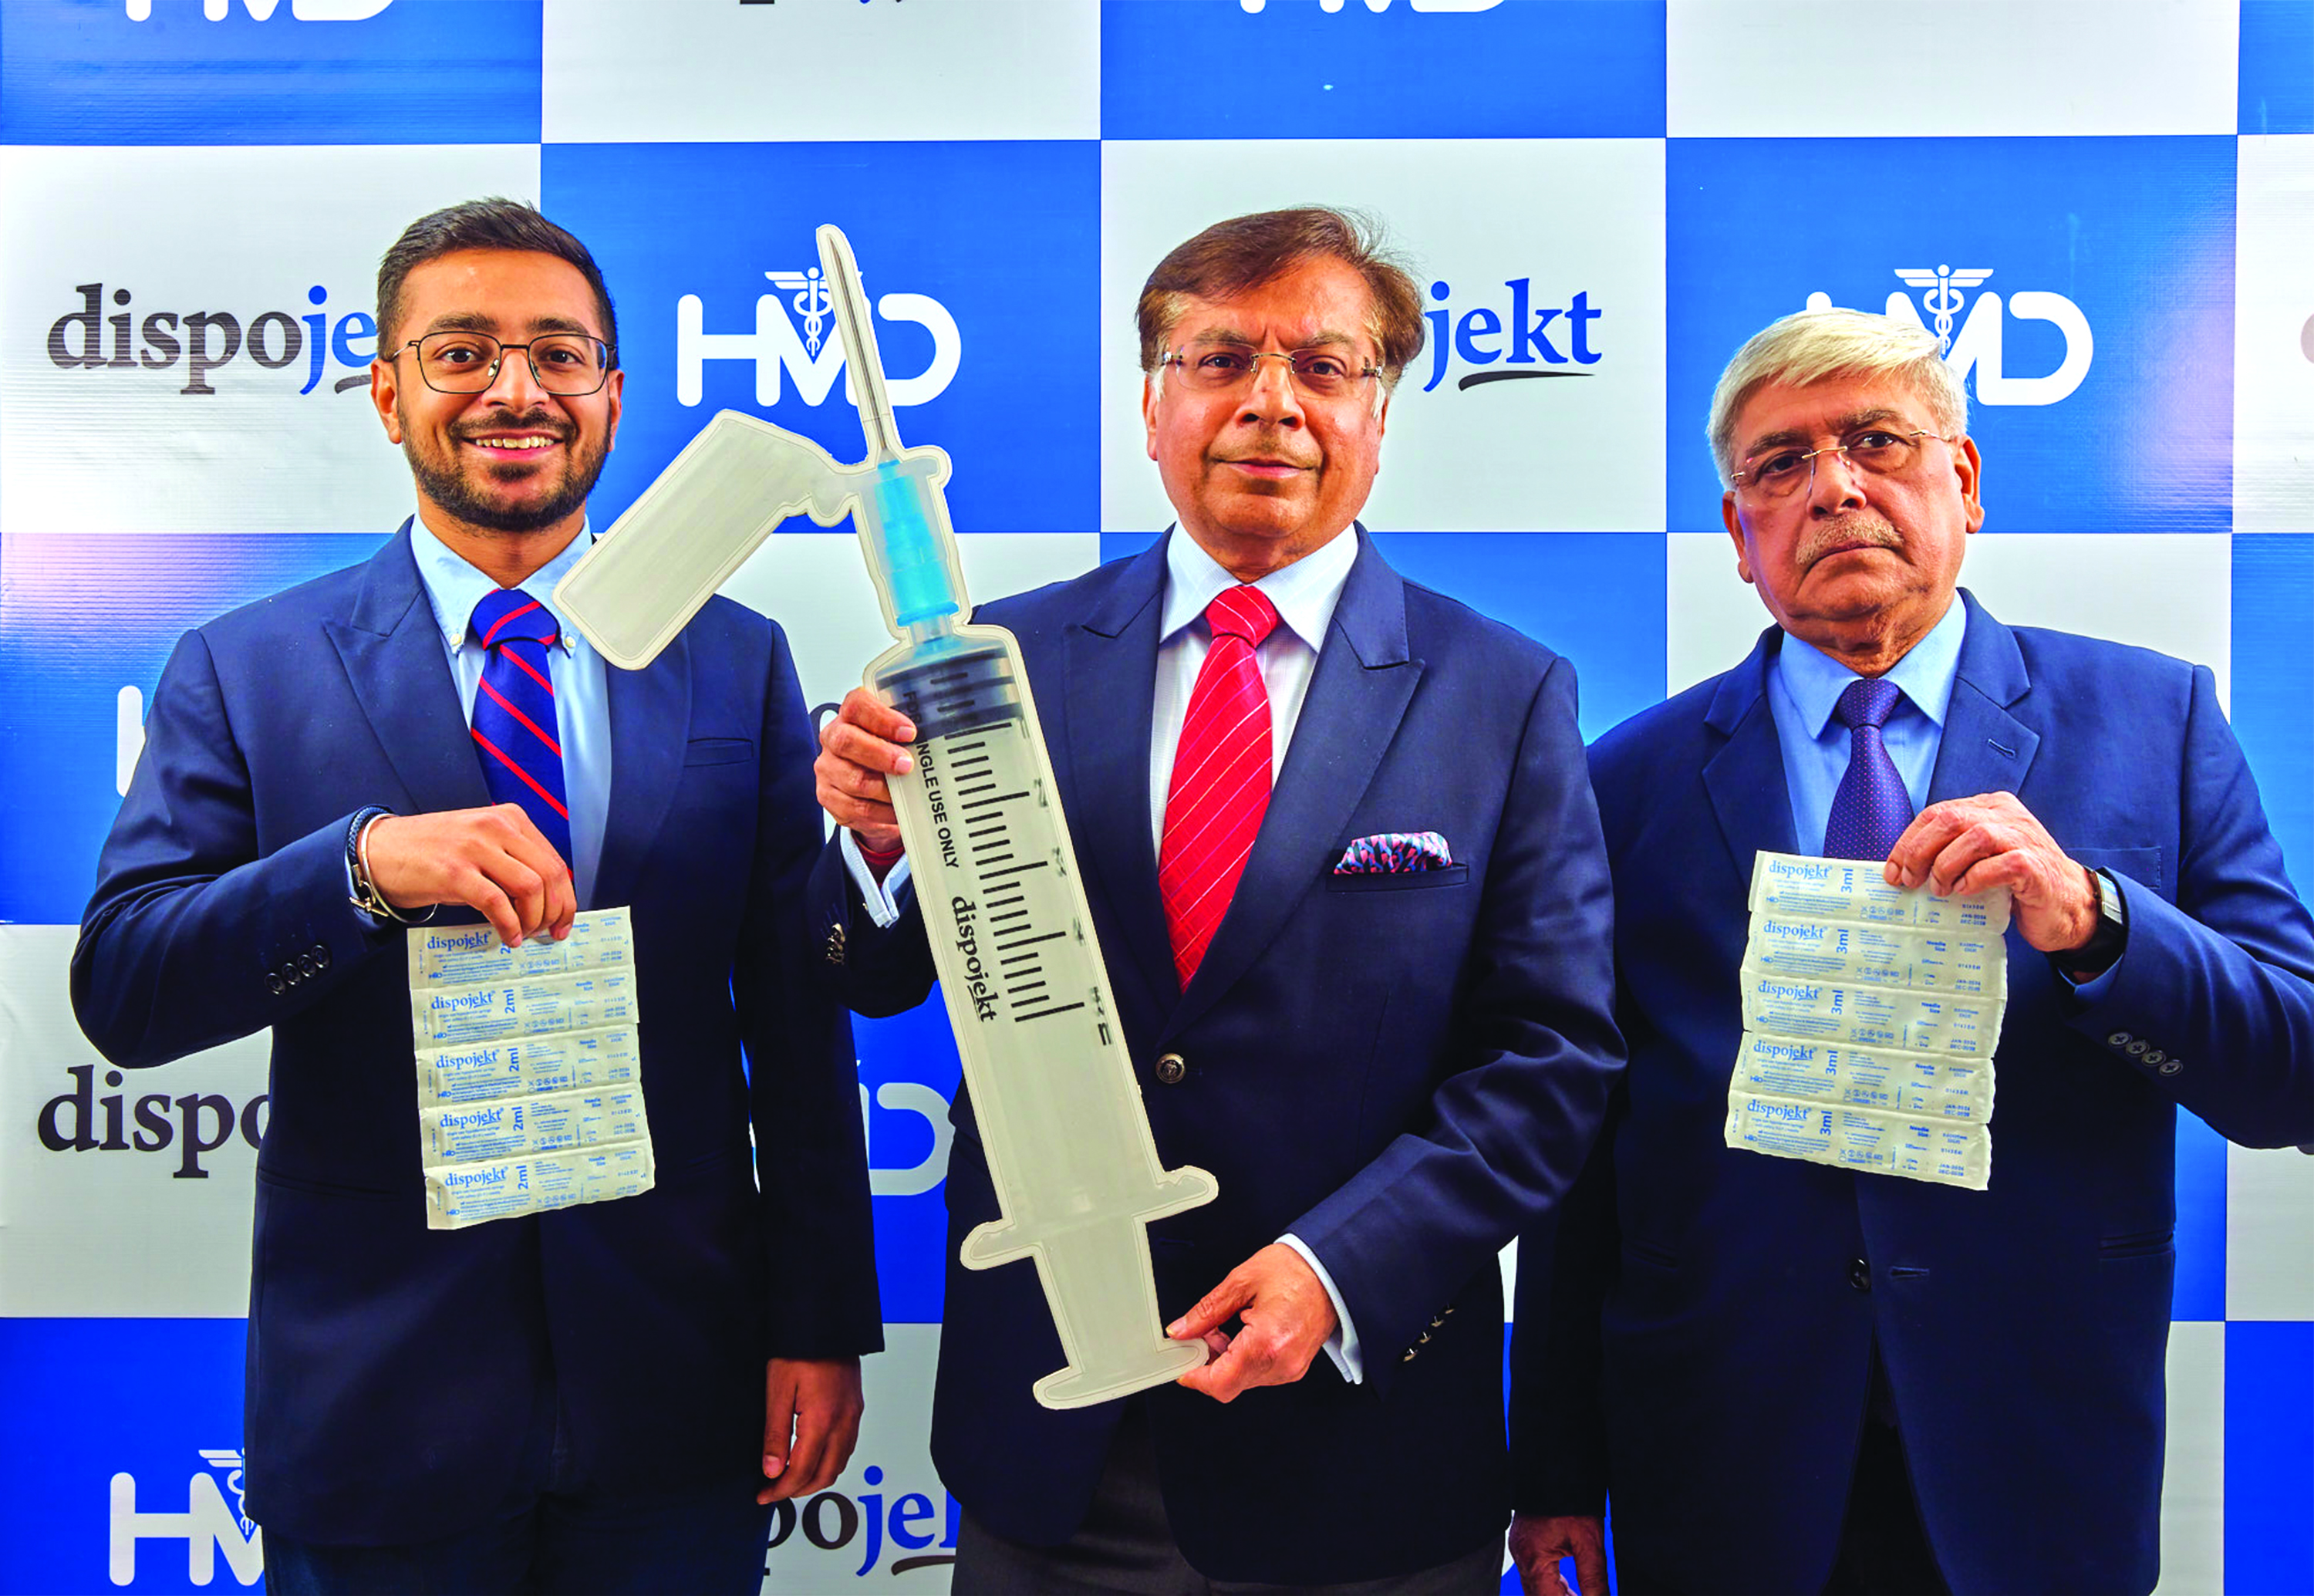 HMD Launches Dispojekt Syringes with Safety Needle